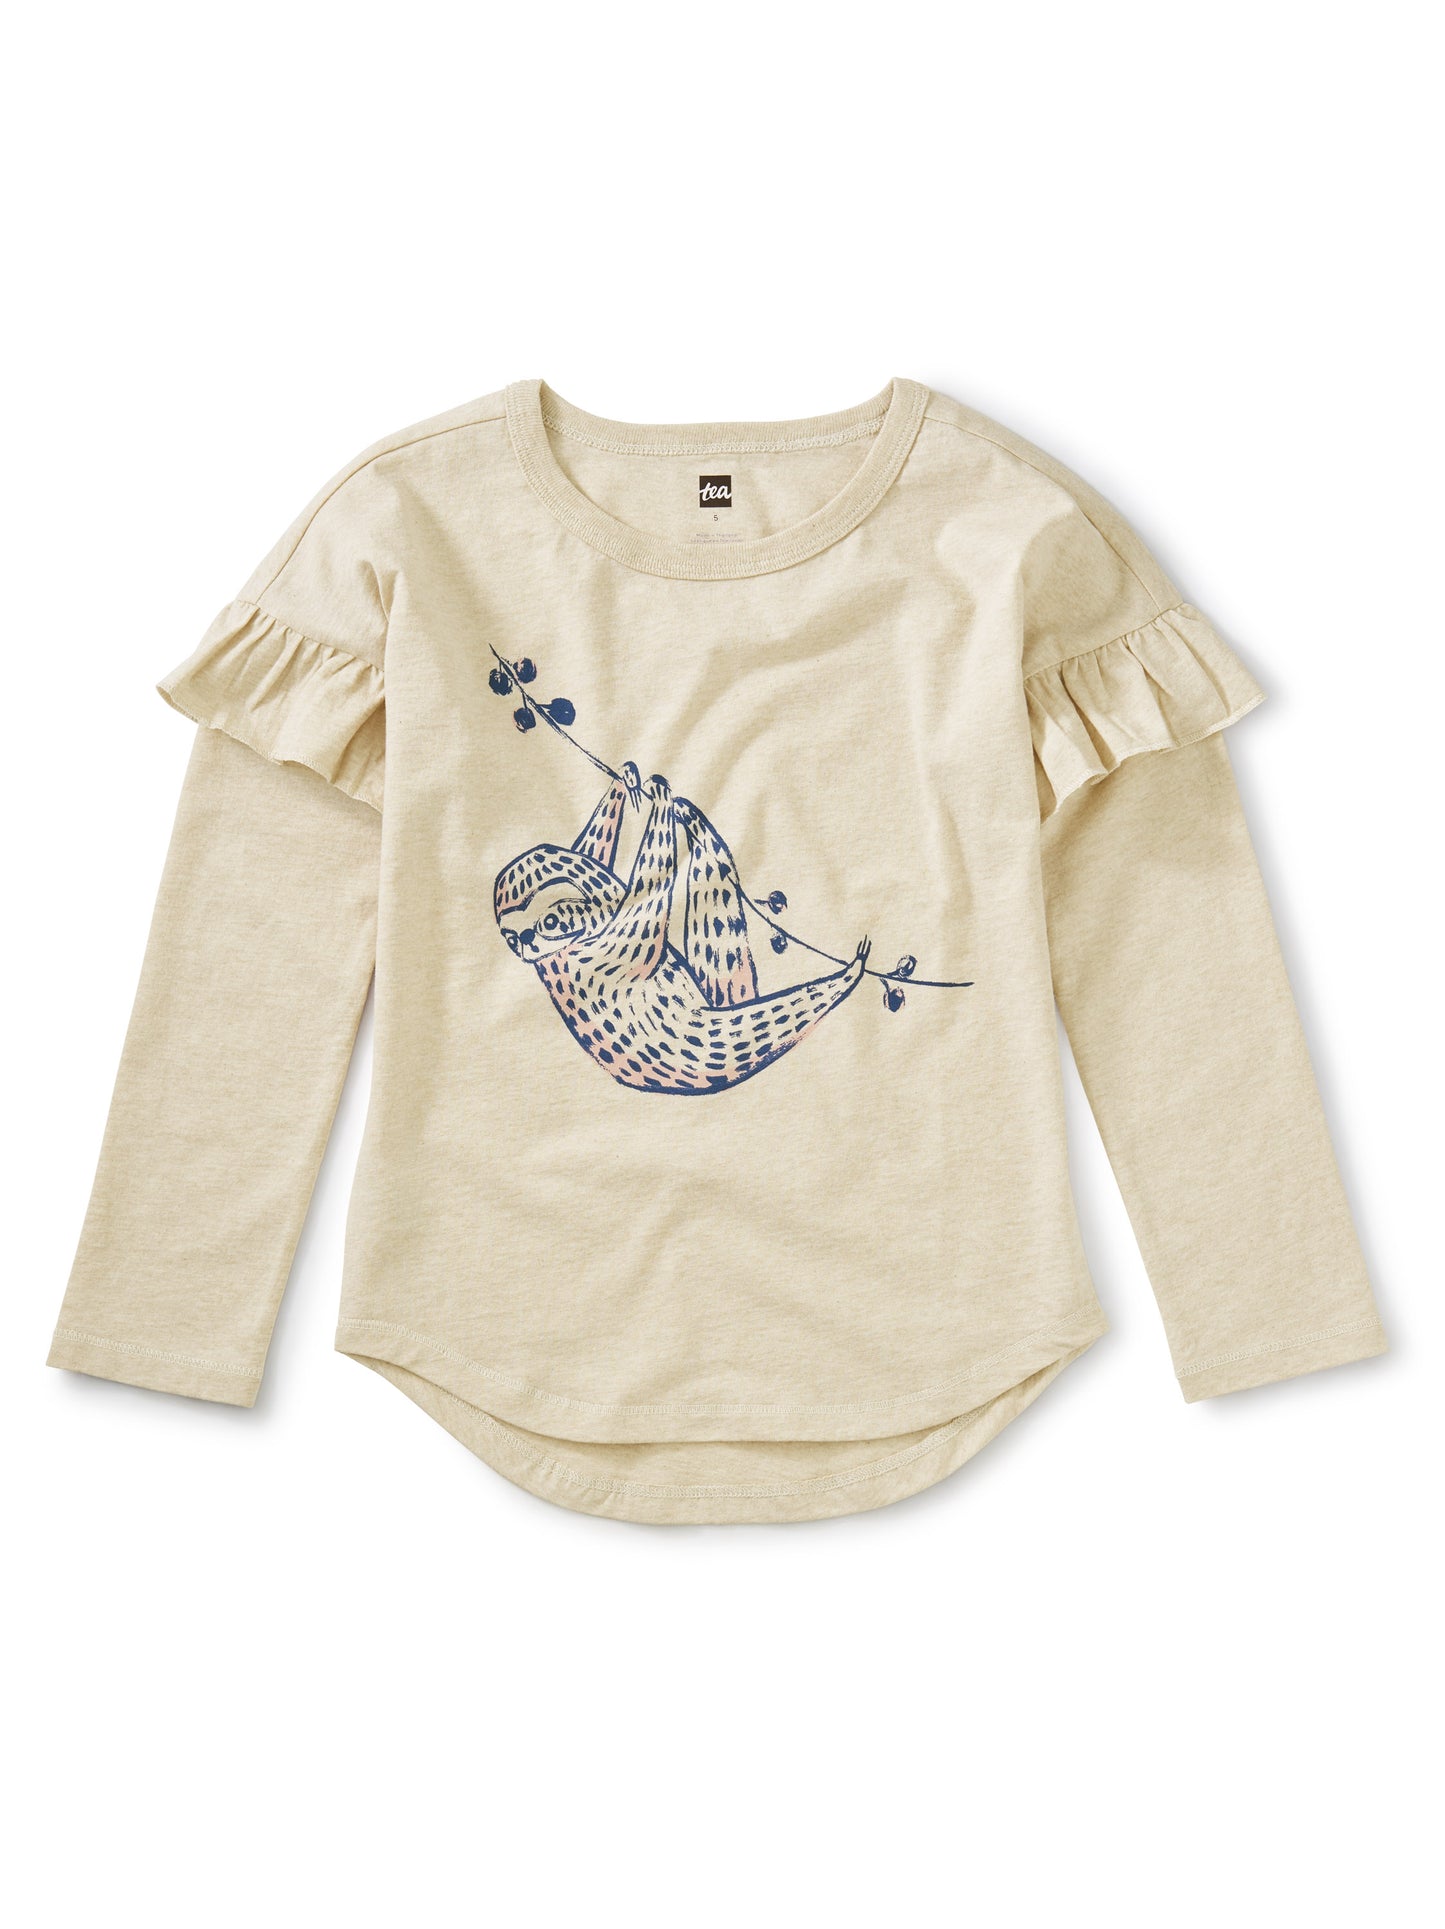 Tee (Long Sleeve Ruffled) - Hanging Out Sloth